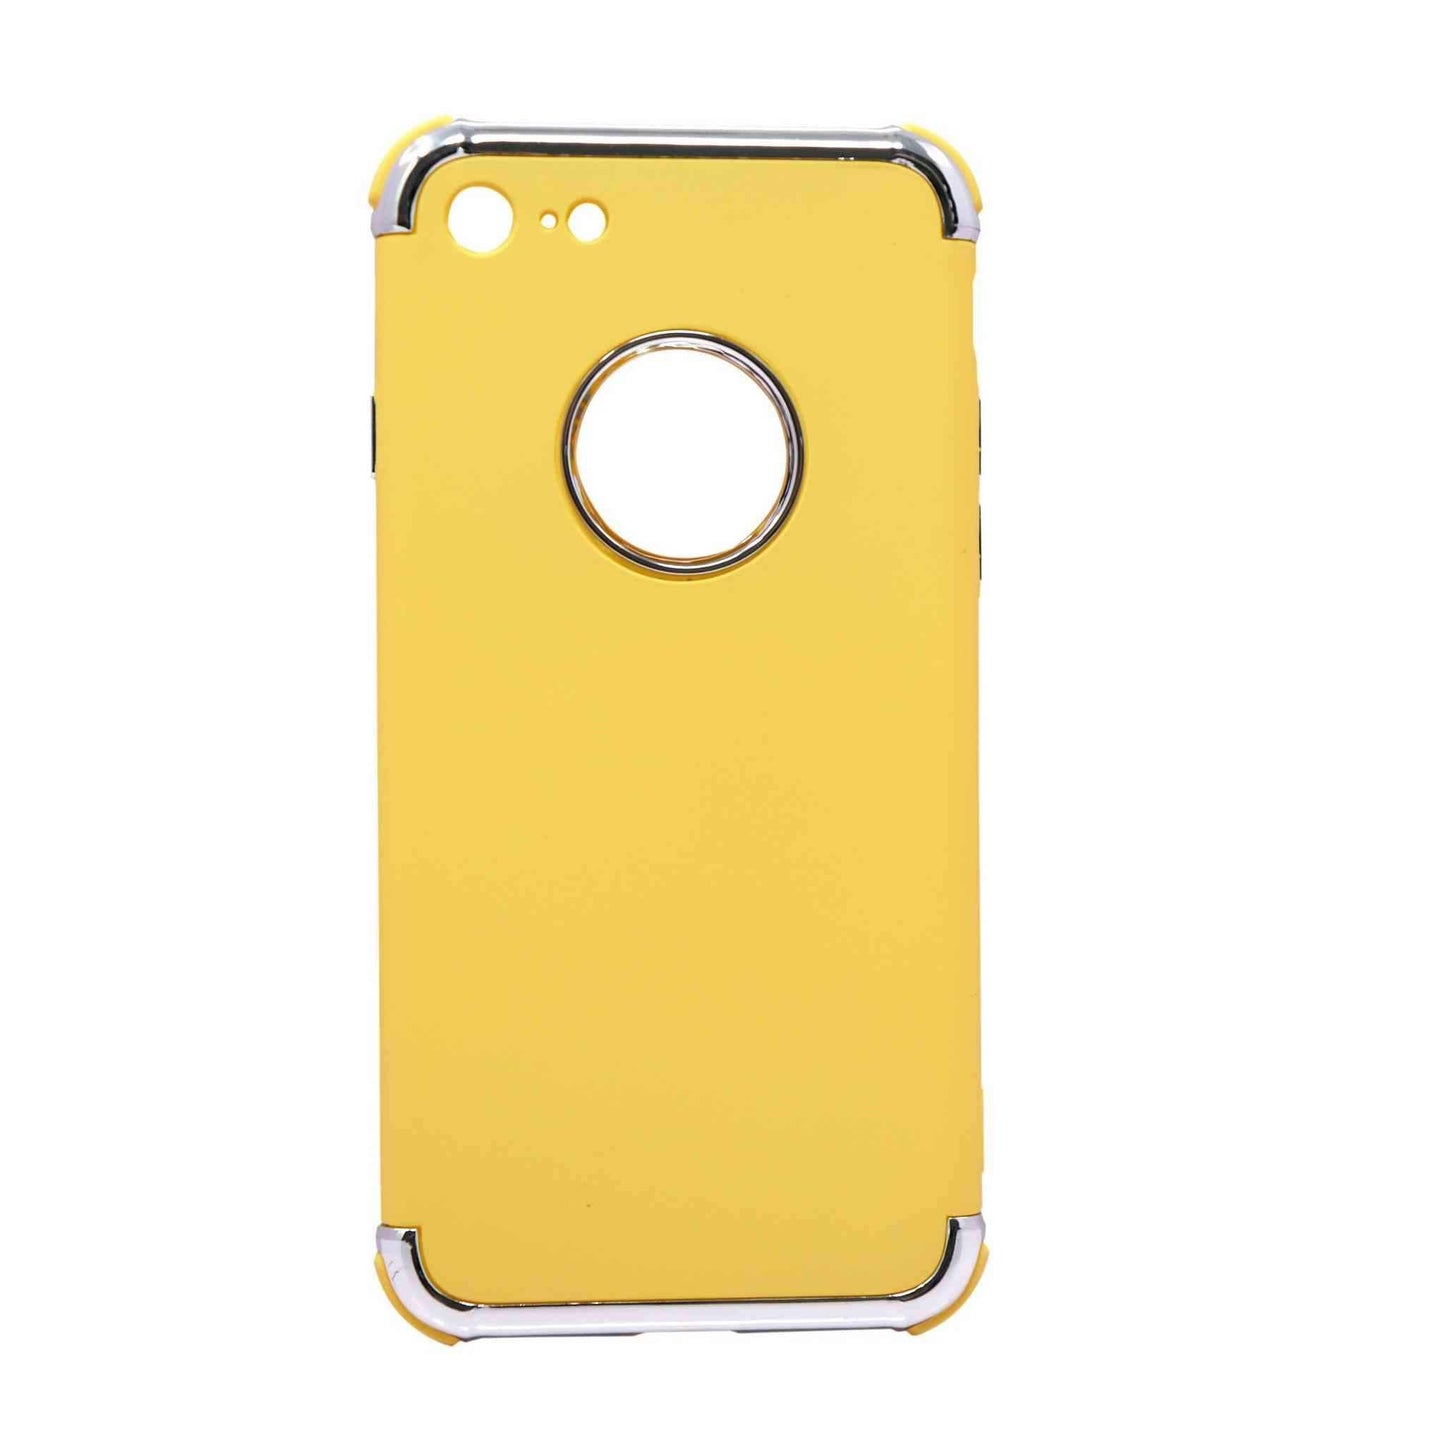 Indian Petals Polycarbonate Electro-plated Shock-proof Anti-scratch Protective Mobile Back Case Cover for Apple iPhone 8, Yellow - Indian Petals